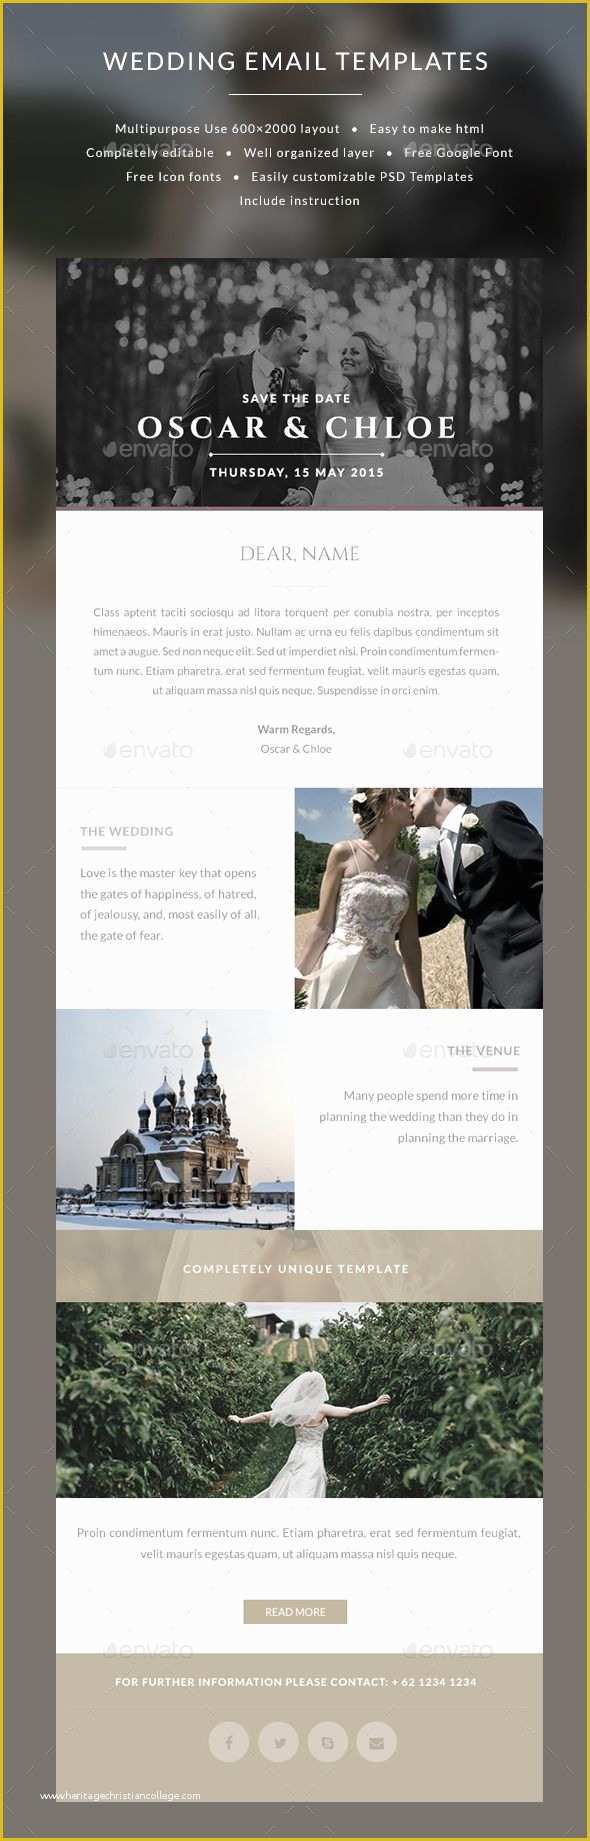 Free Email Wedding Invitation Templates Of the 25 Best Email Invites Ideas On Pinterest